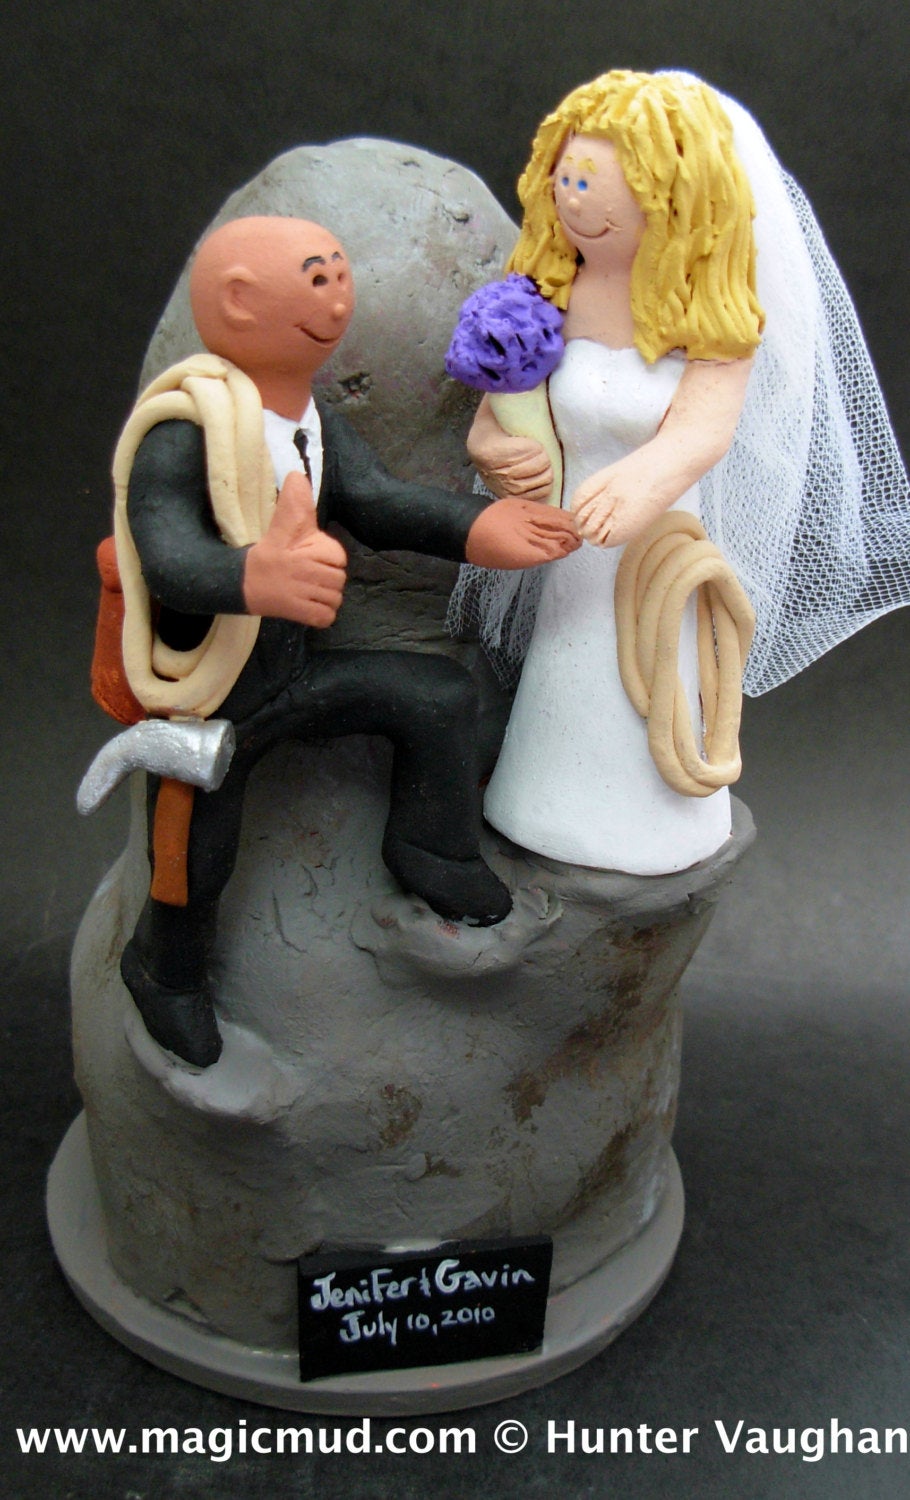 Latin American Groom Marries Caucasian Bride Wedding CakeTopper, Wedding Anniversary Gift for Mountain Climbers, Anniversary Gift for Hikers - iWeddingCakeToppers